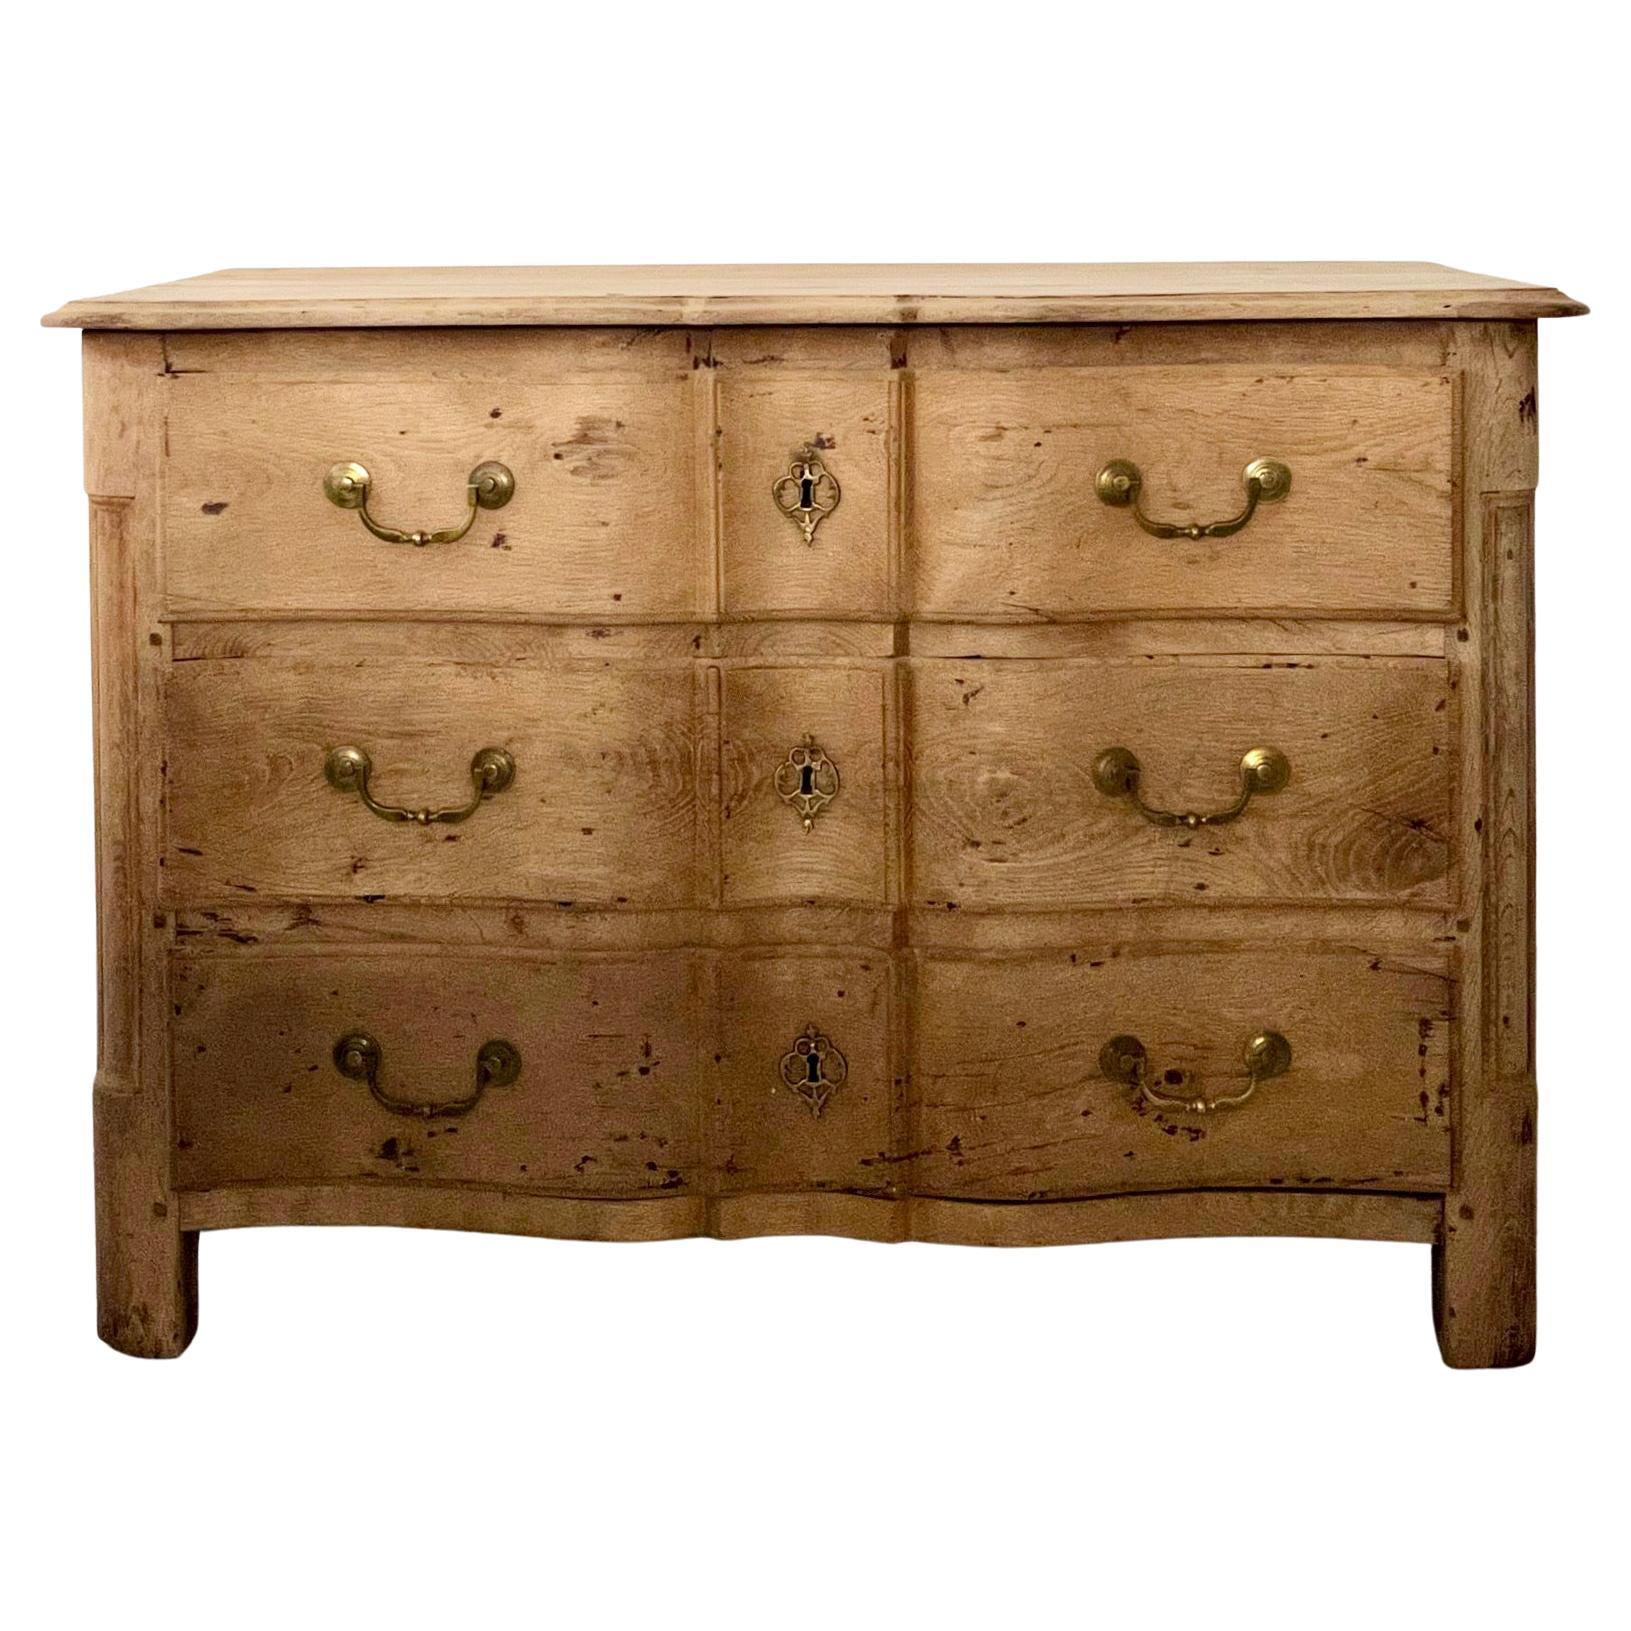 18th Century French Louis XV Period Commode en Arbelete in bleached oak finish. The front facade having an arbalete with shaped top. The original bronze hardware drop handles and escutcheons adorn the fronts of each drawer. The corners are rounded